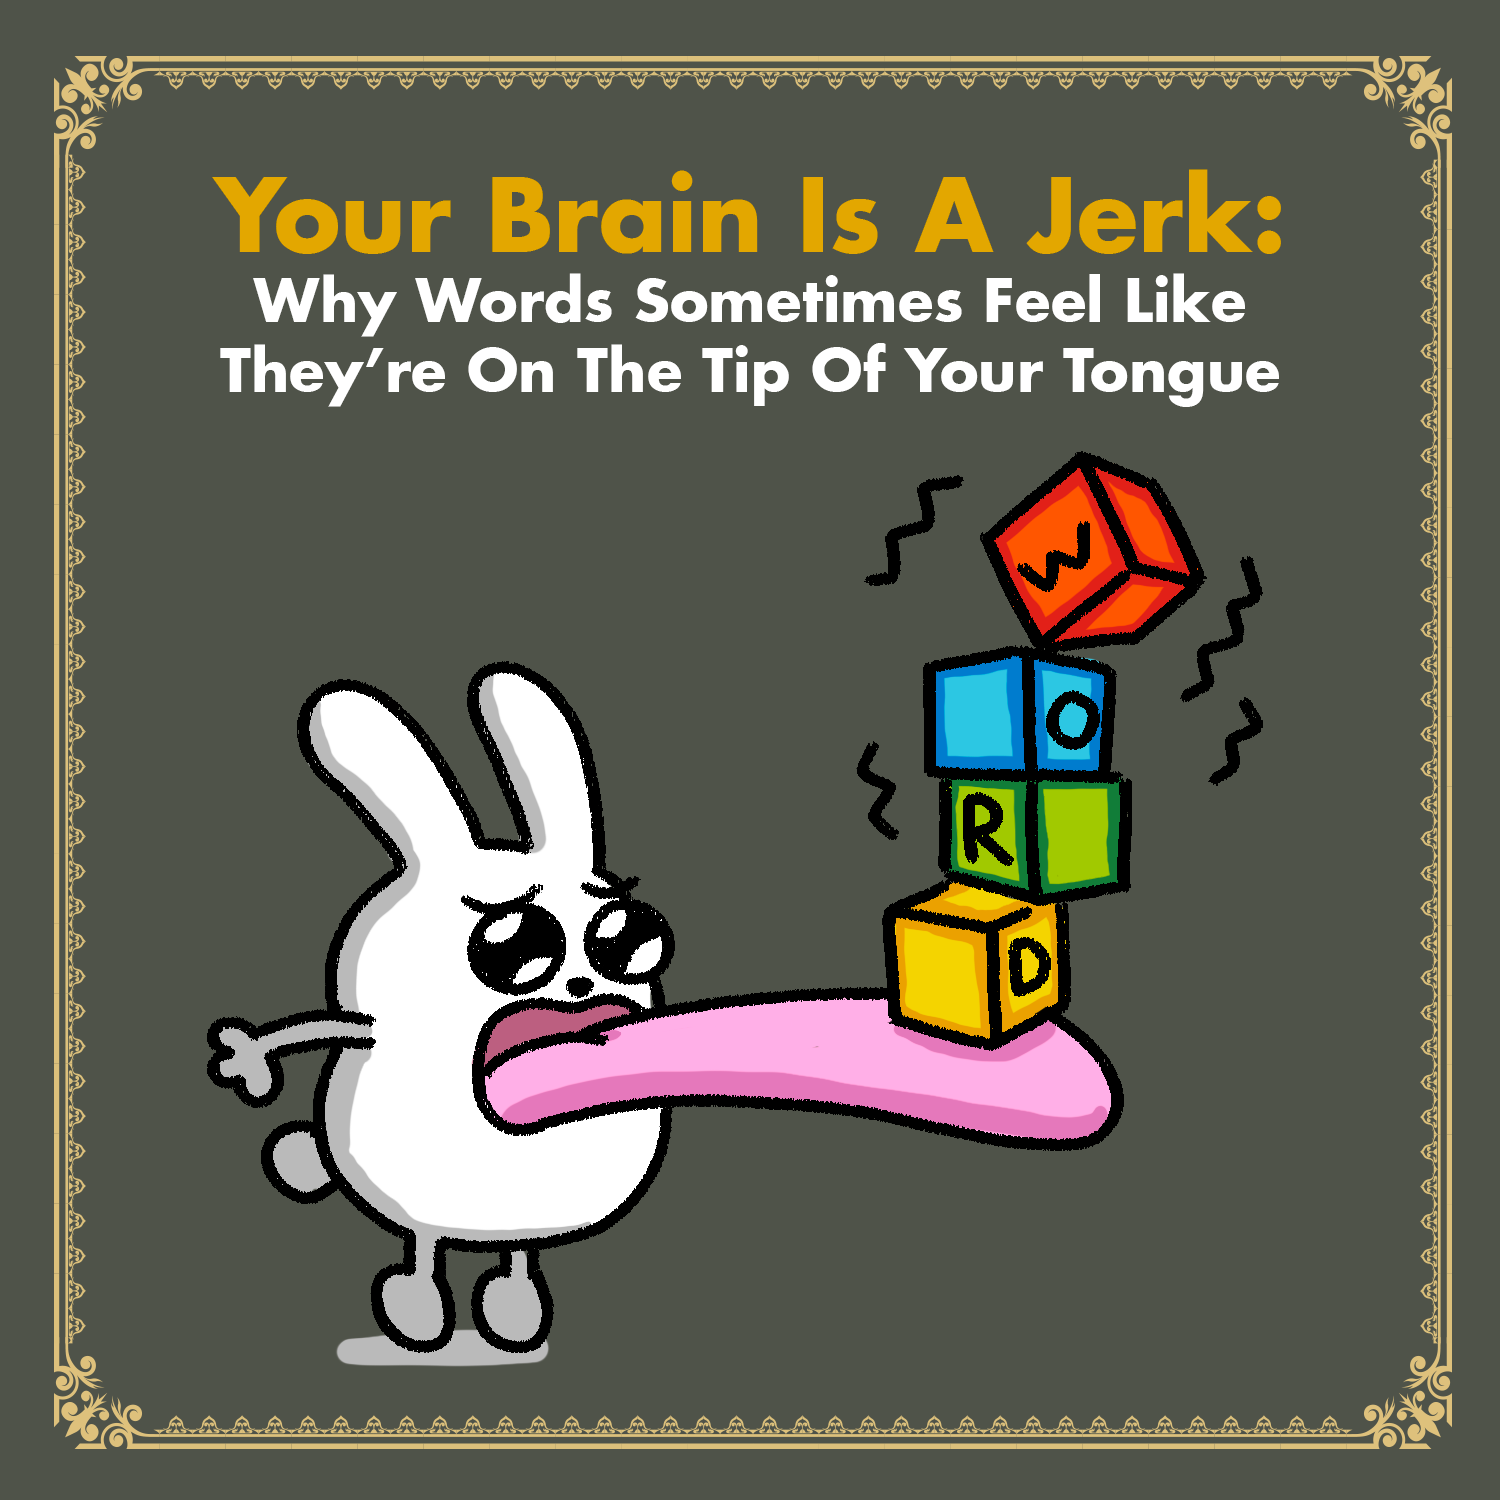 Your Brain is a Jerk: Tip of Your Tongue